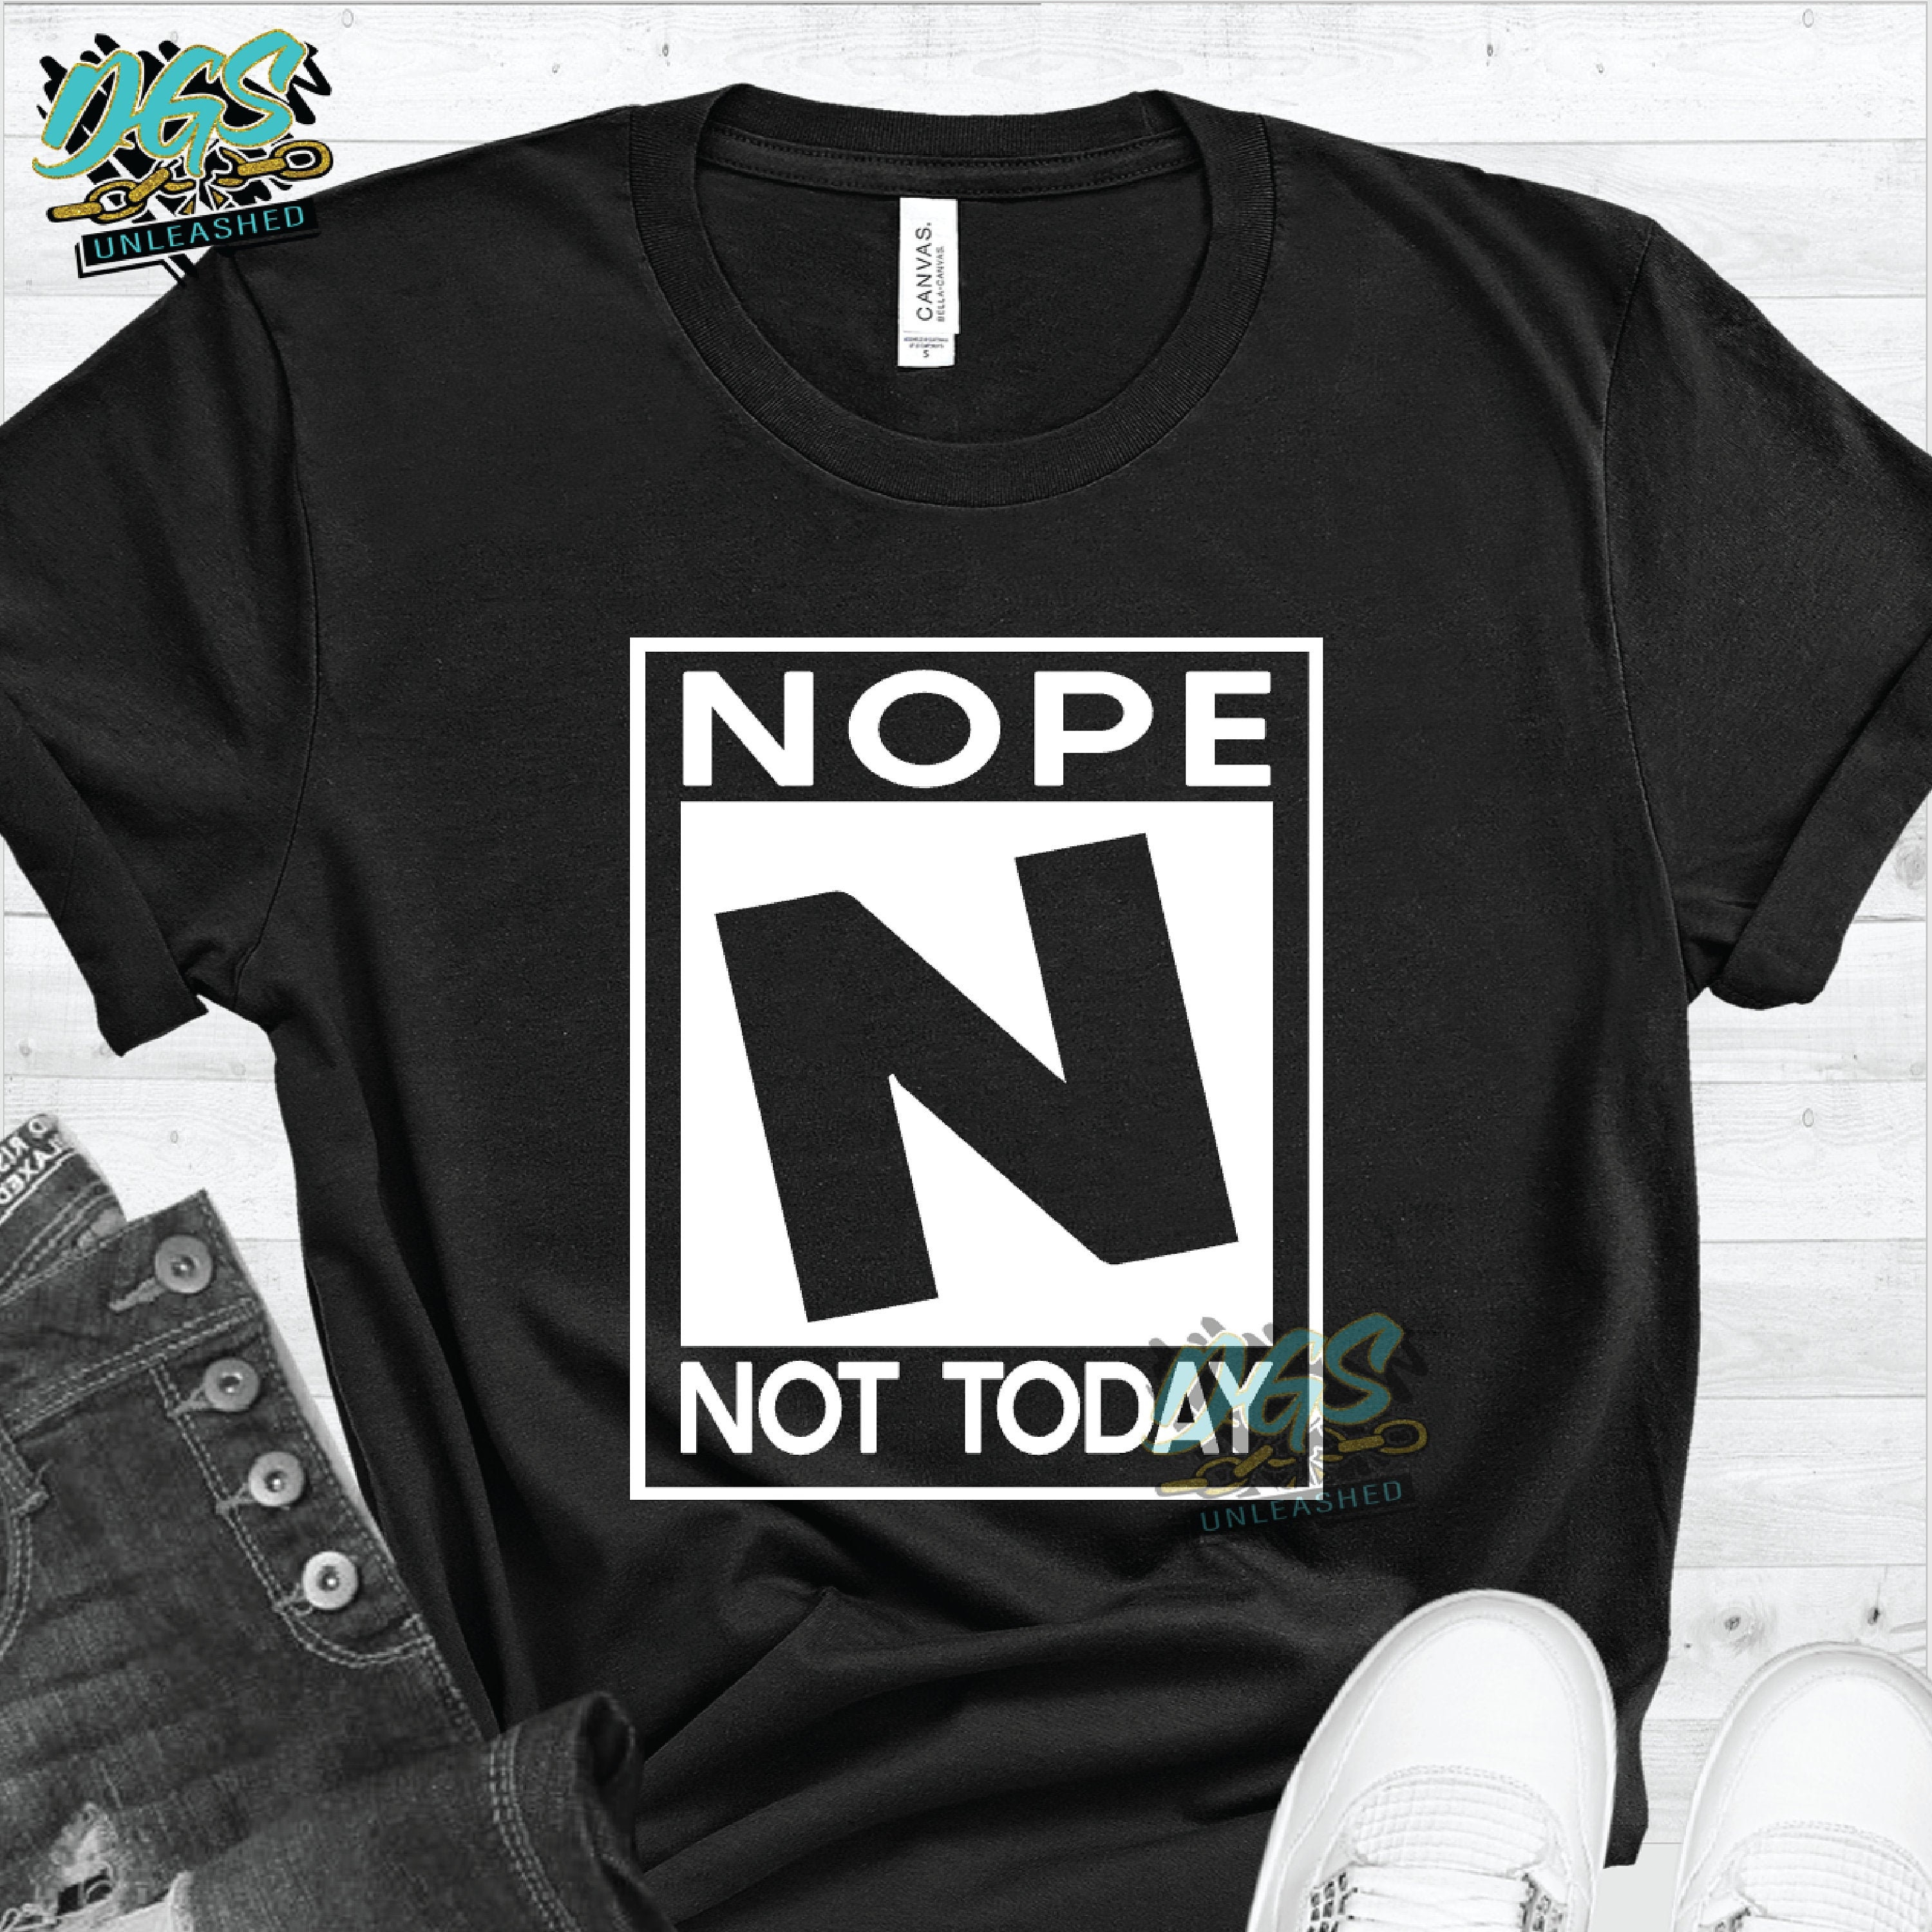 Today Etsy Shirt - Nope Not